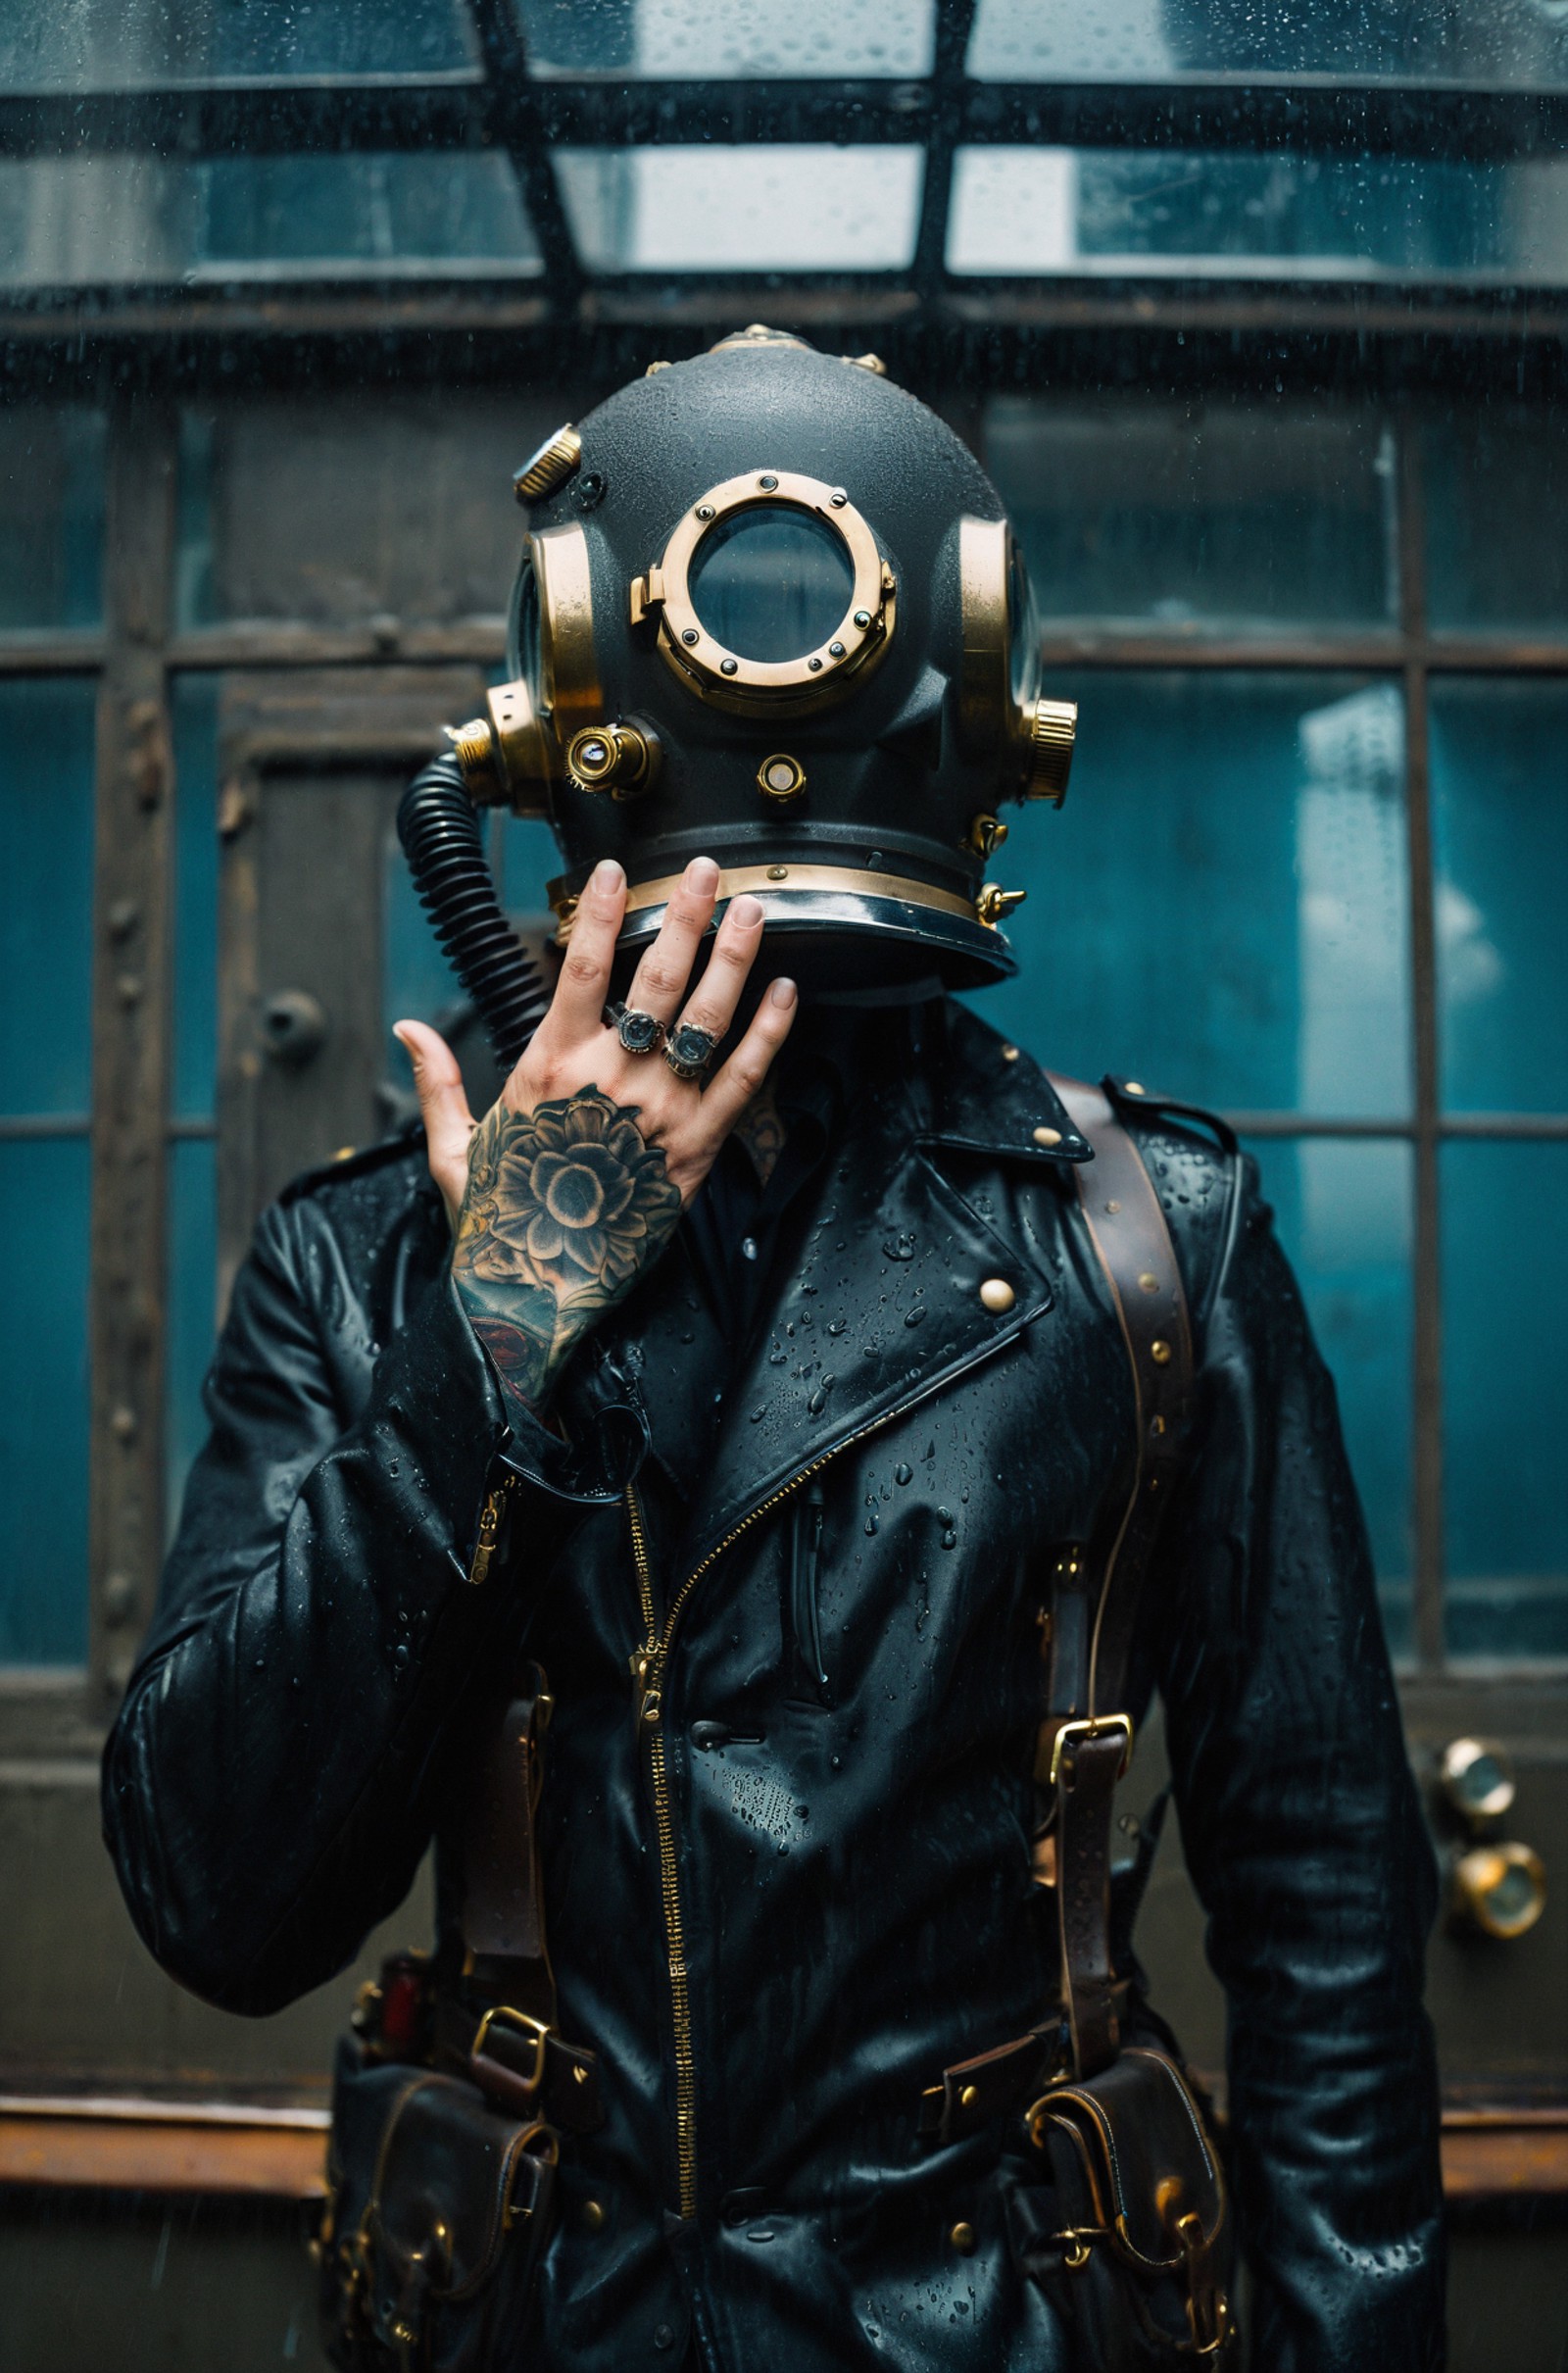 film aesthetic,Surreal portrait, man in vintage diver's helmet, glass portholes obscuring face, rain-soaked ambiance, urba...